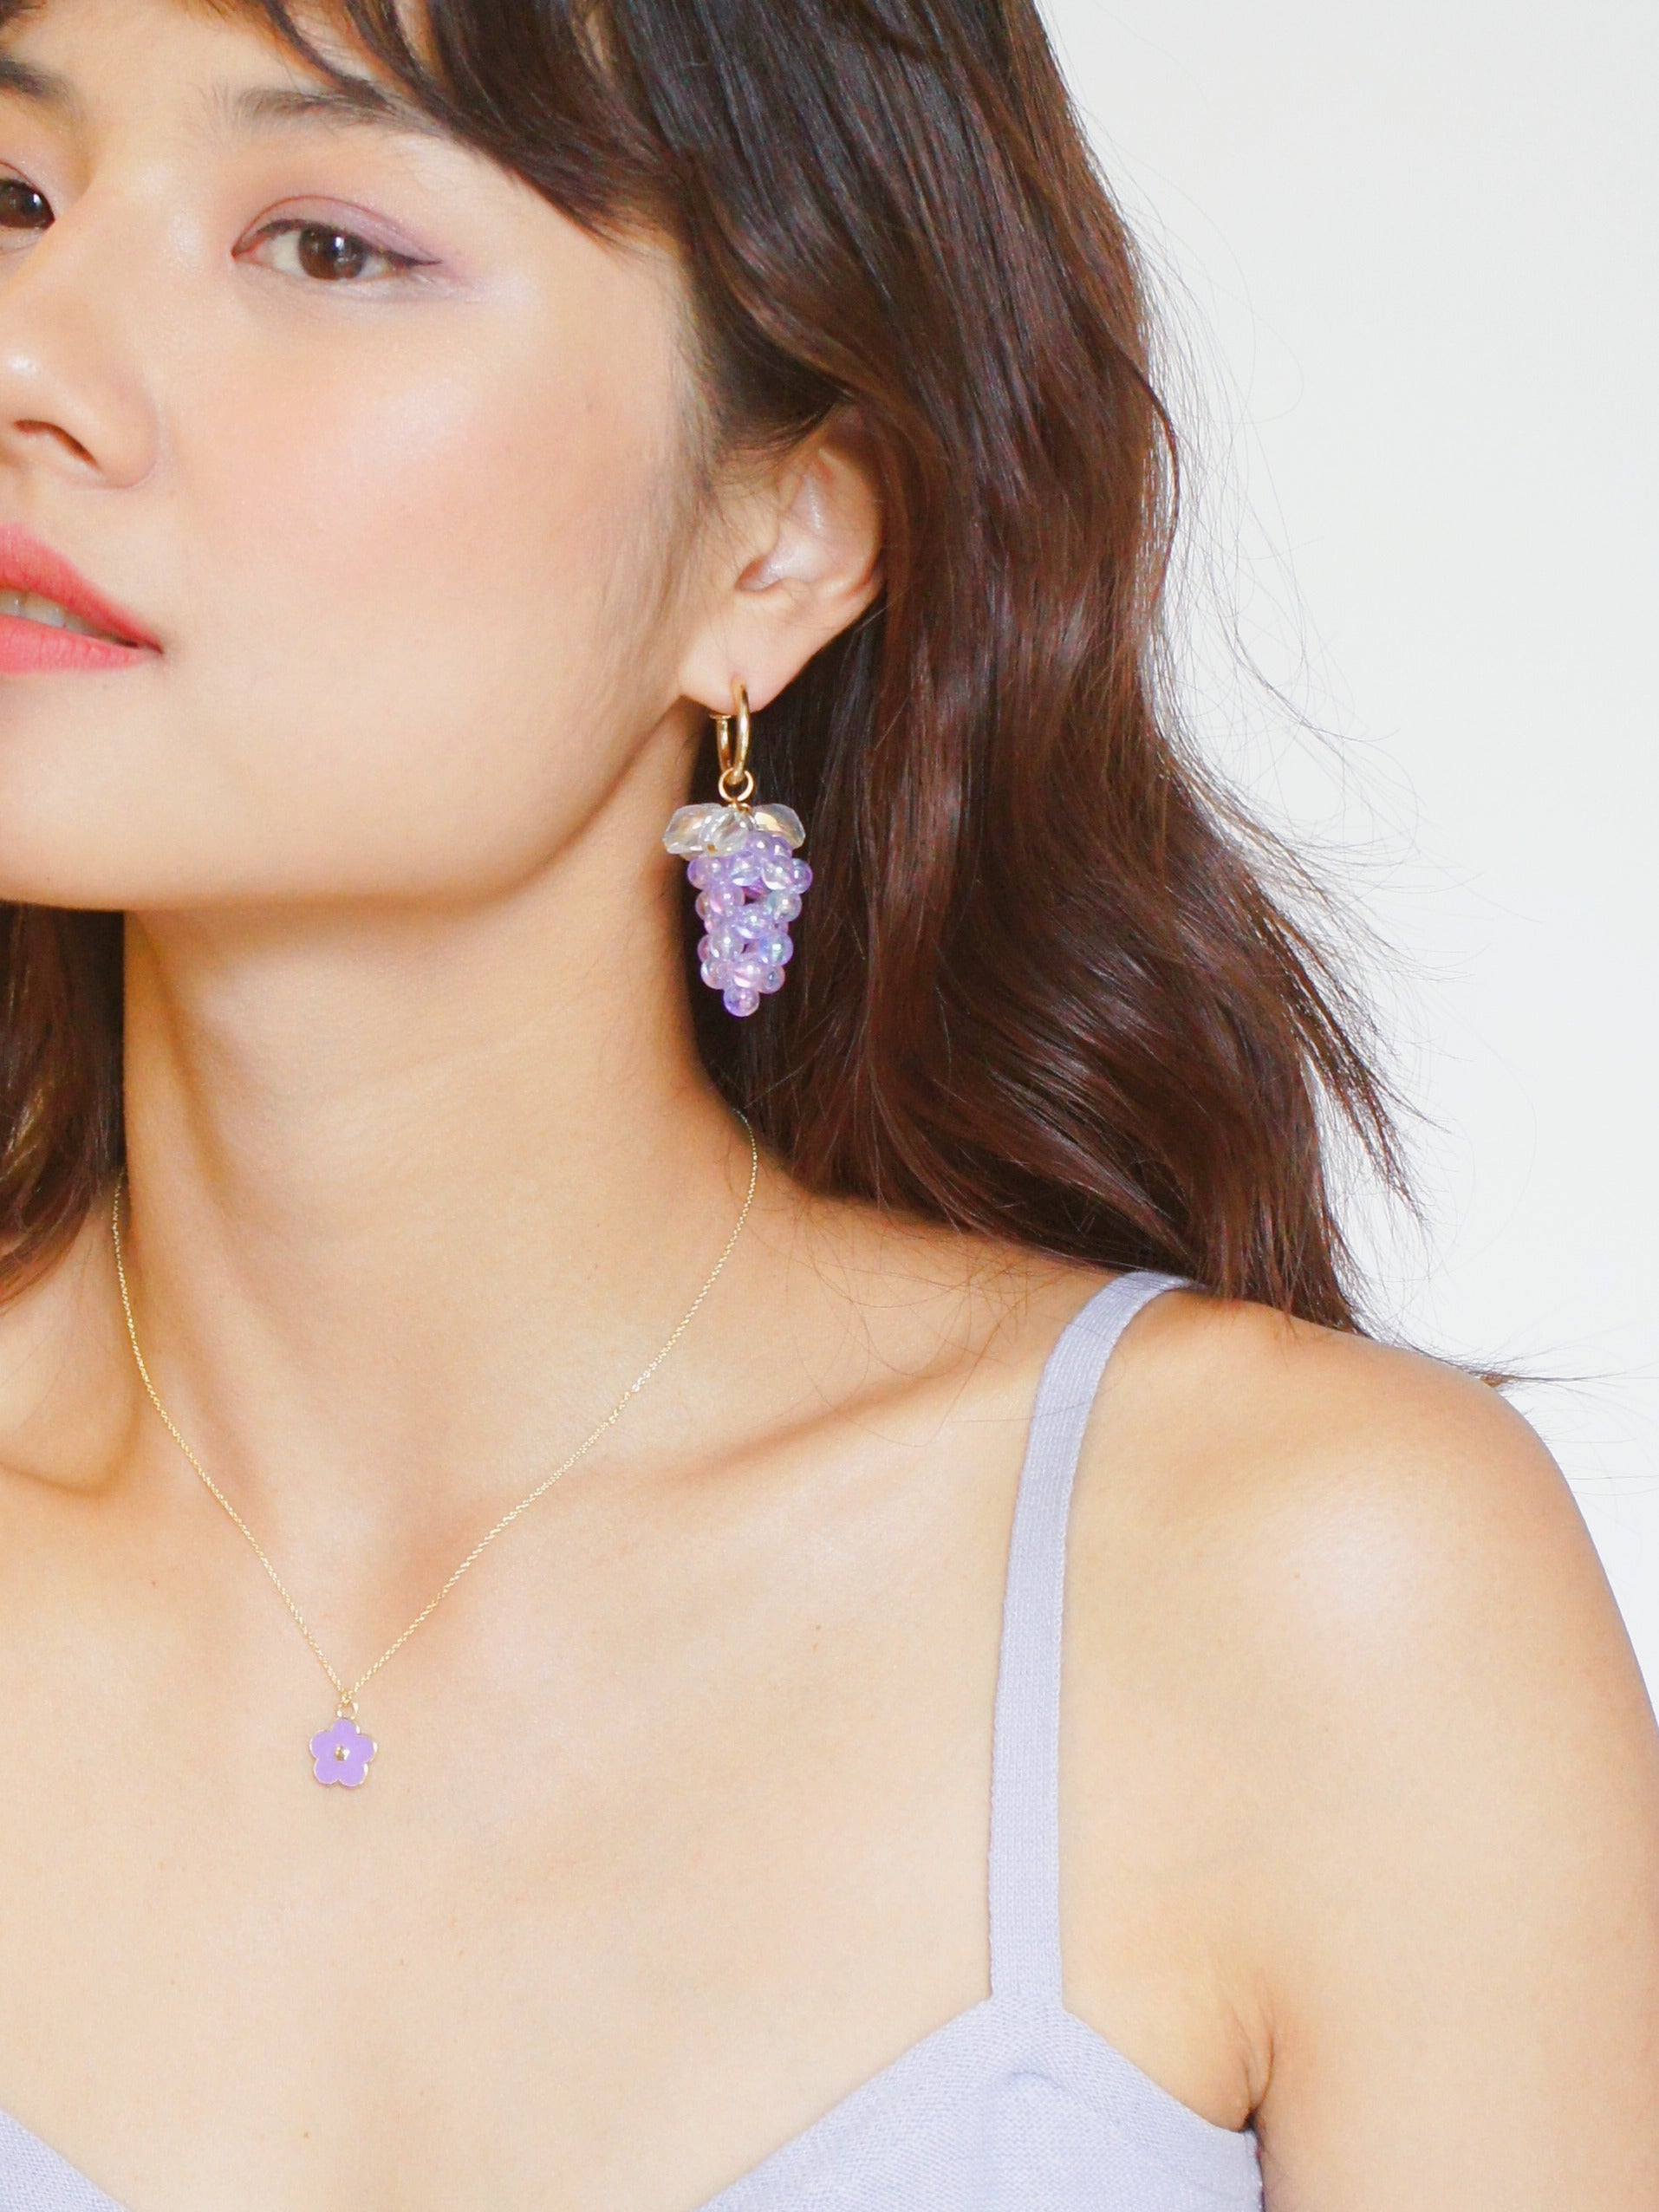 Very Grapeful Detachable Faceted Grape Drop Earrings with Iridescent Leaves